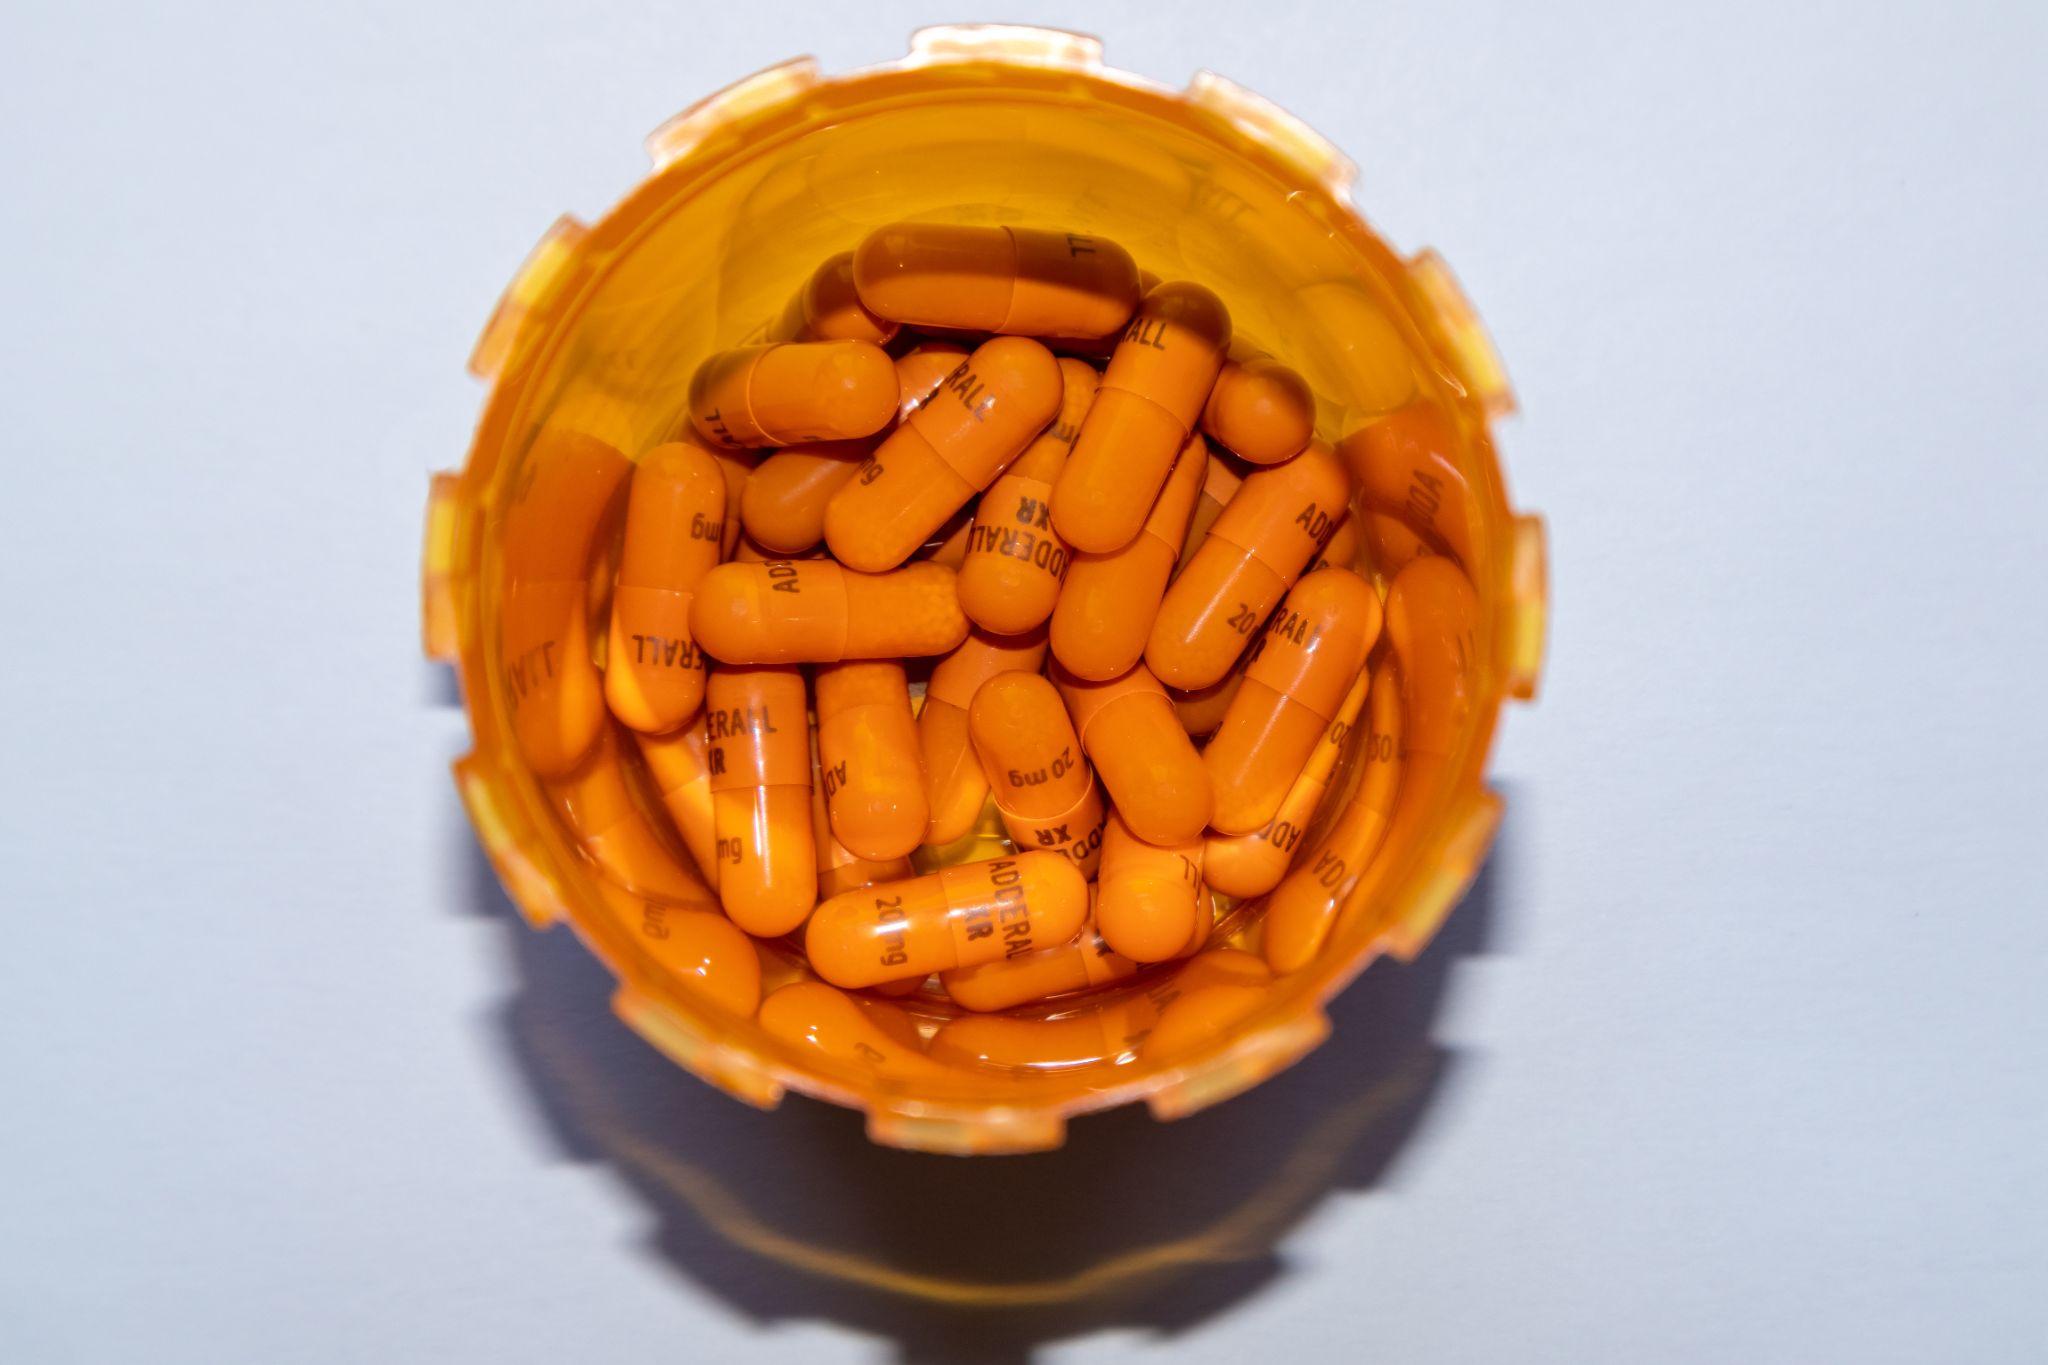 Pill bottle with capsules of Adderall